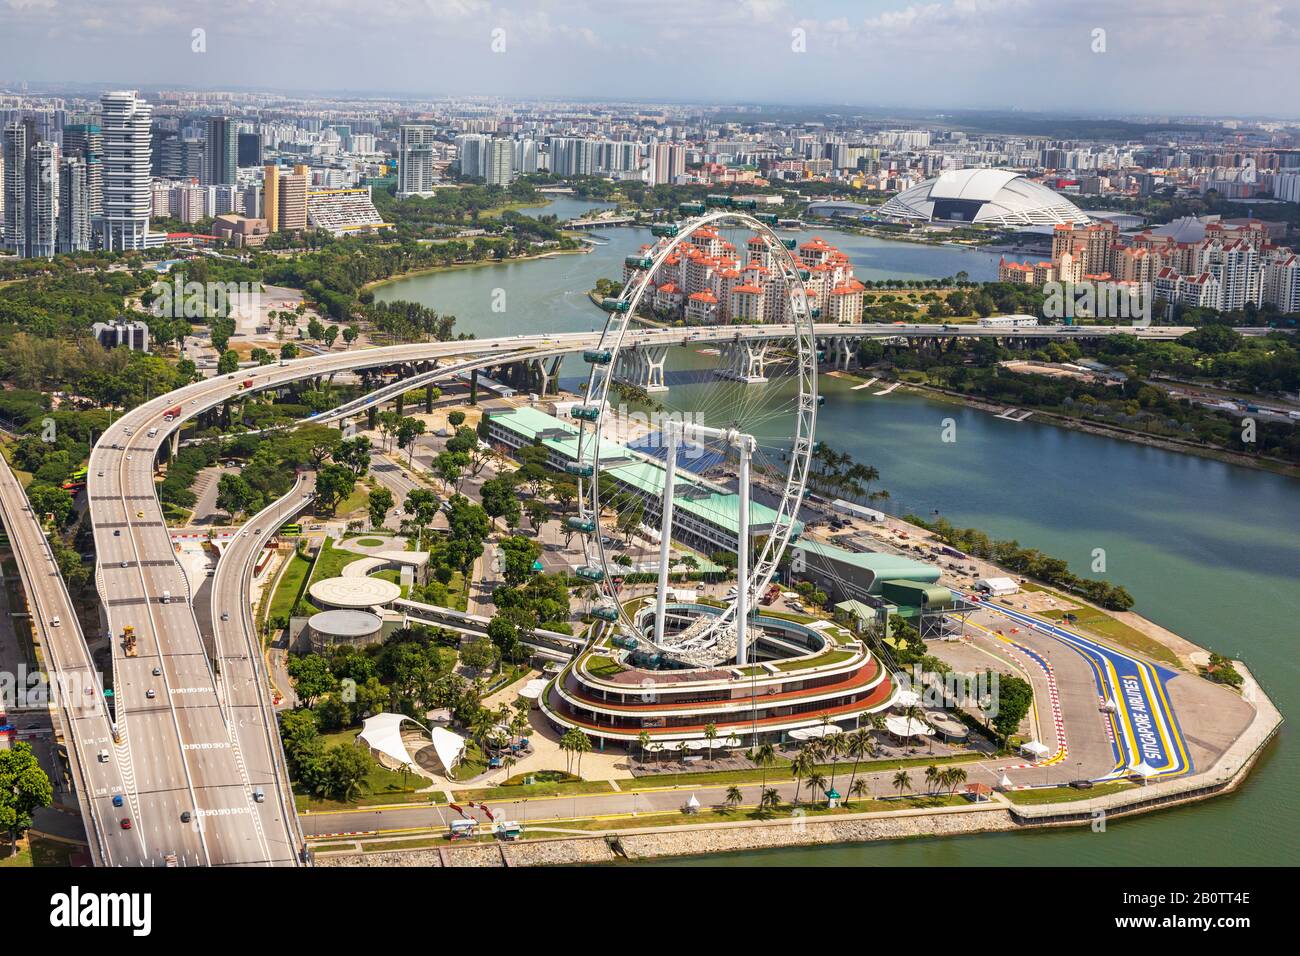 High view of Singapore skyline with the Singapore Flyer Ferris wheel and the racetrack for the Singapore Grande Prix, Singapore Stock Photo